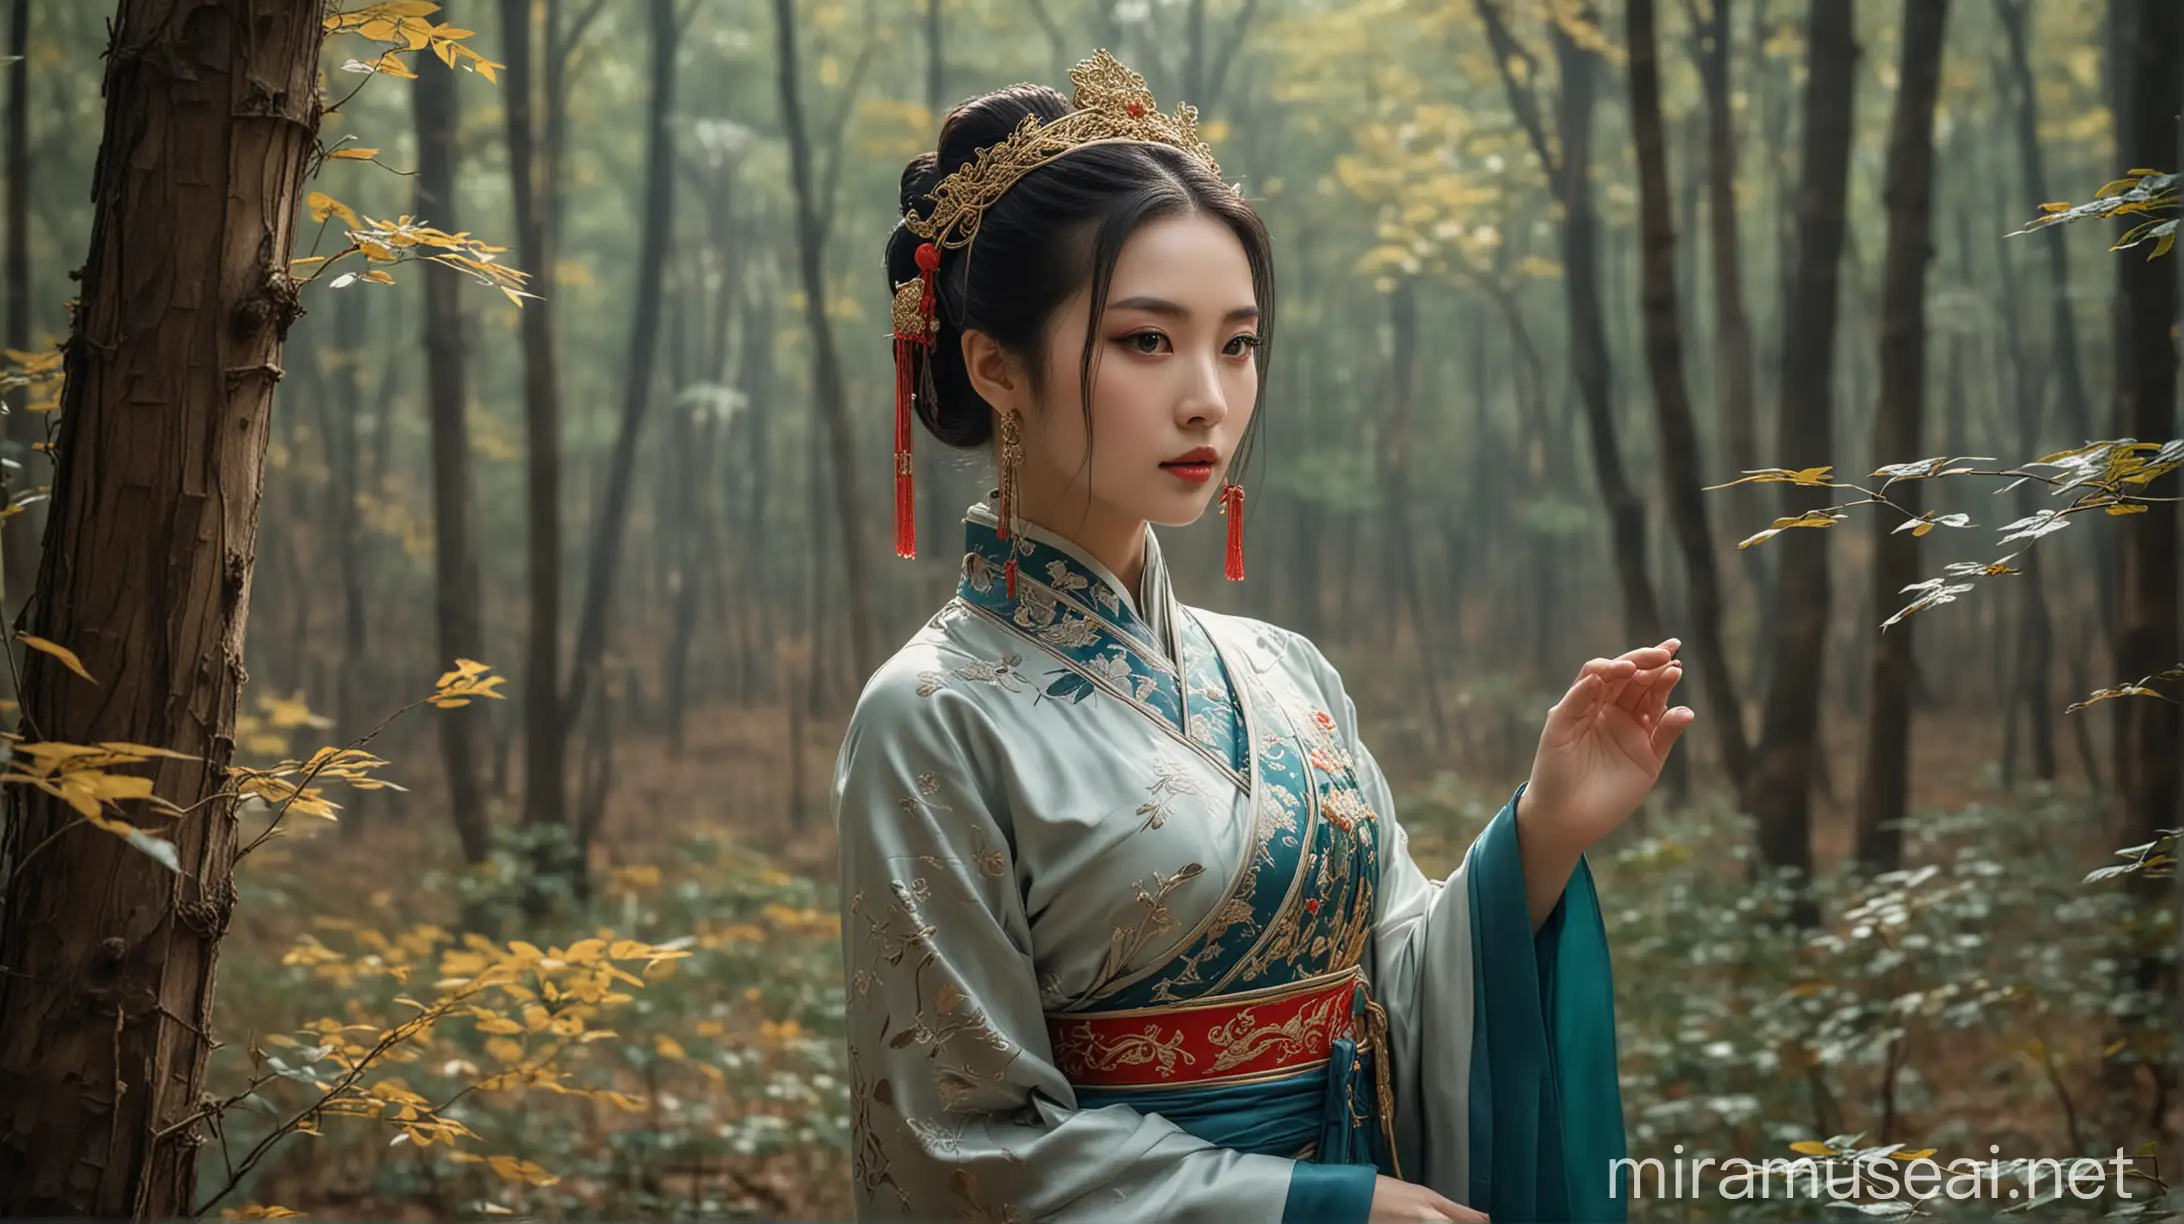 Chinese Beauty in Ancient Forest Fresh and Refined Traditional Costume Styling